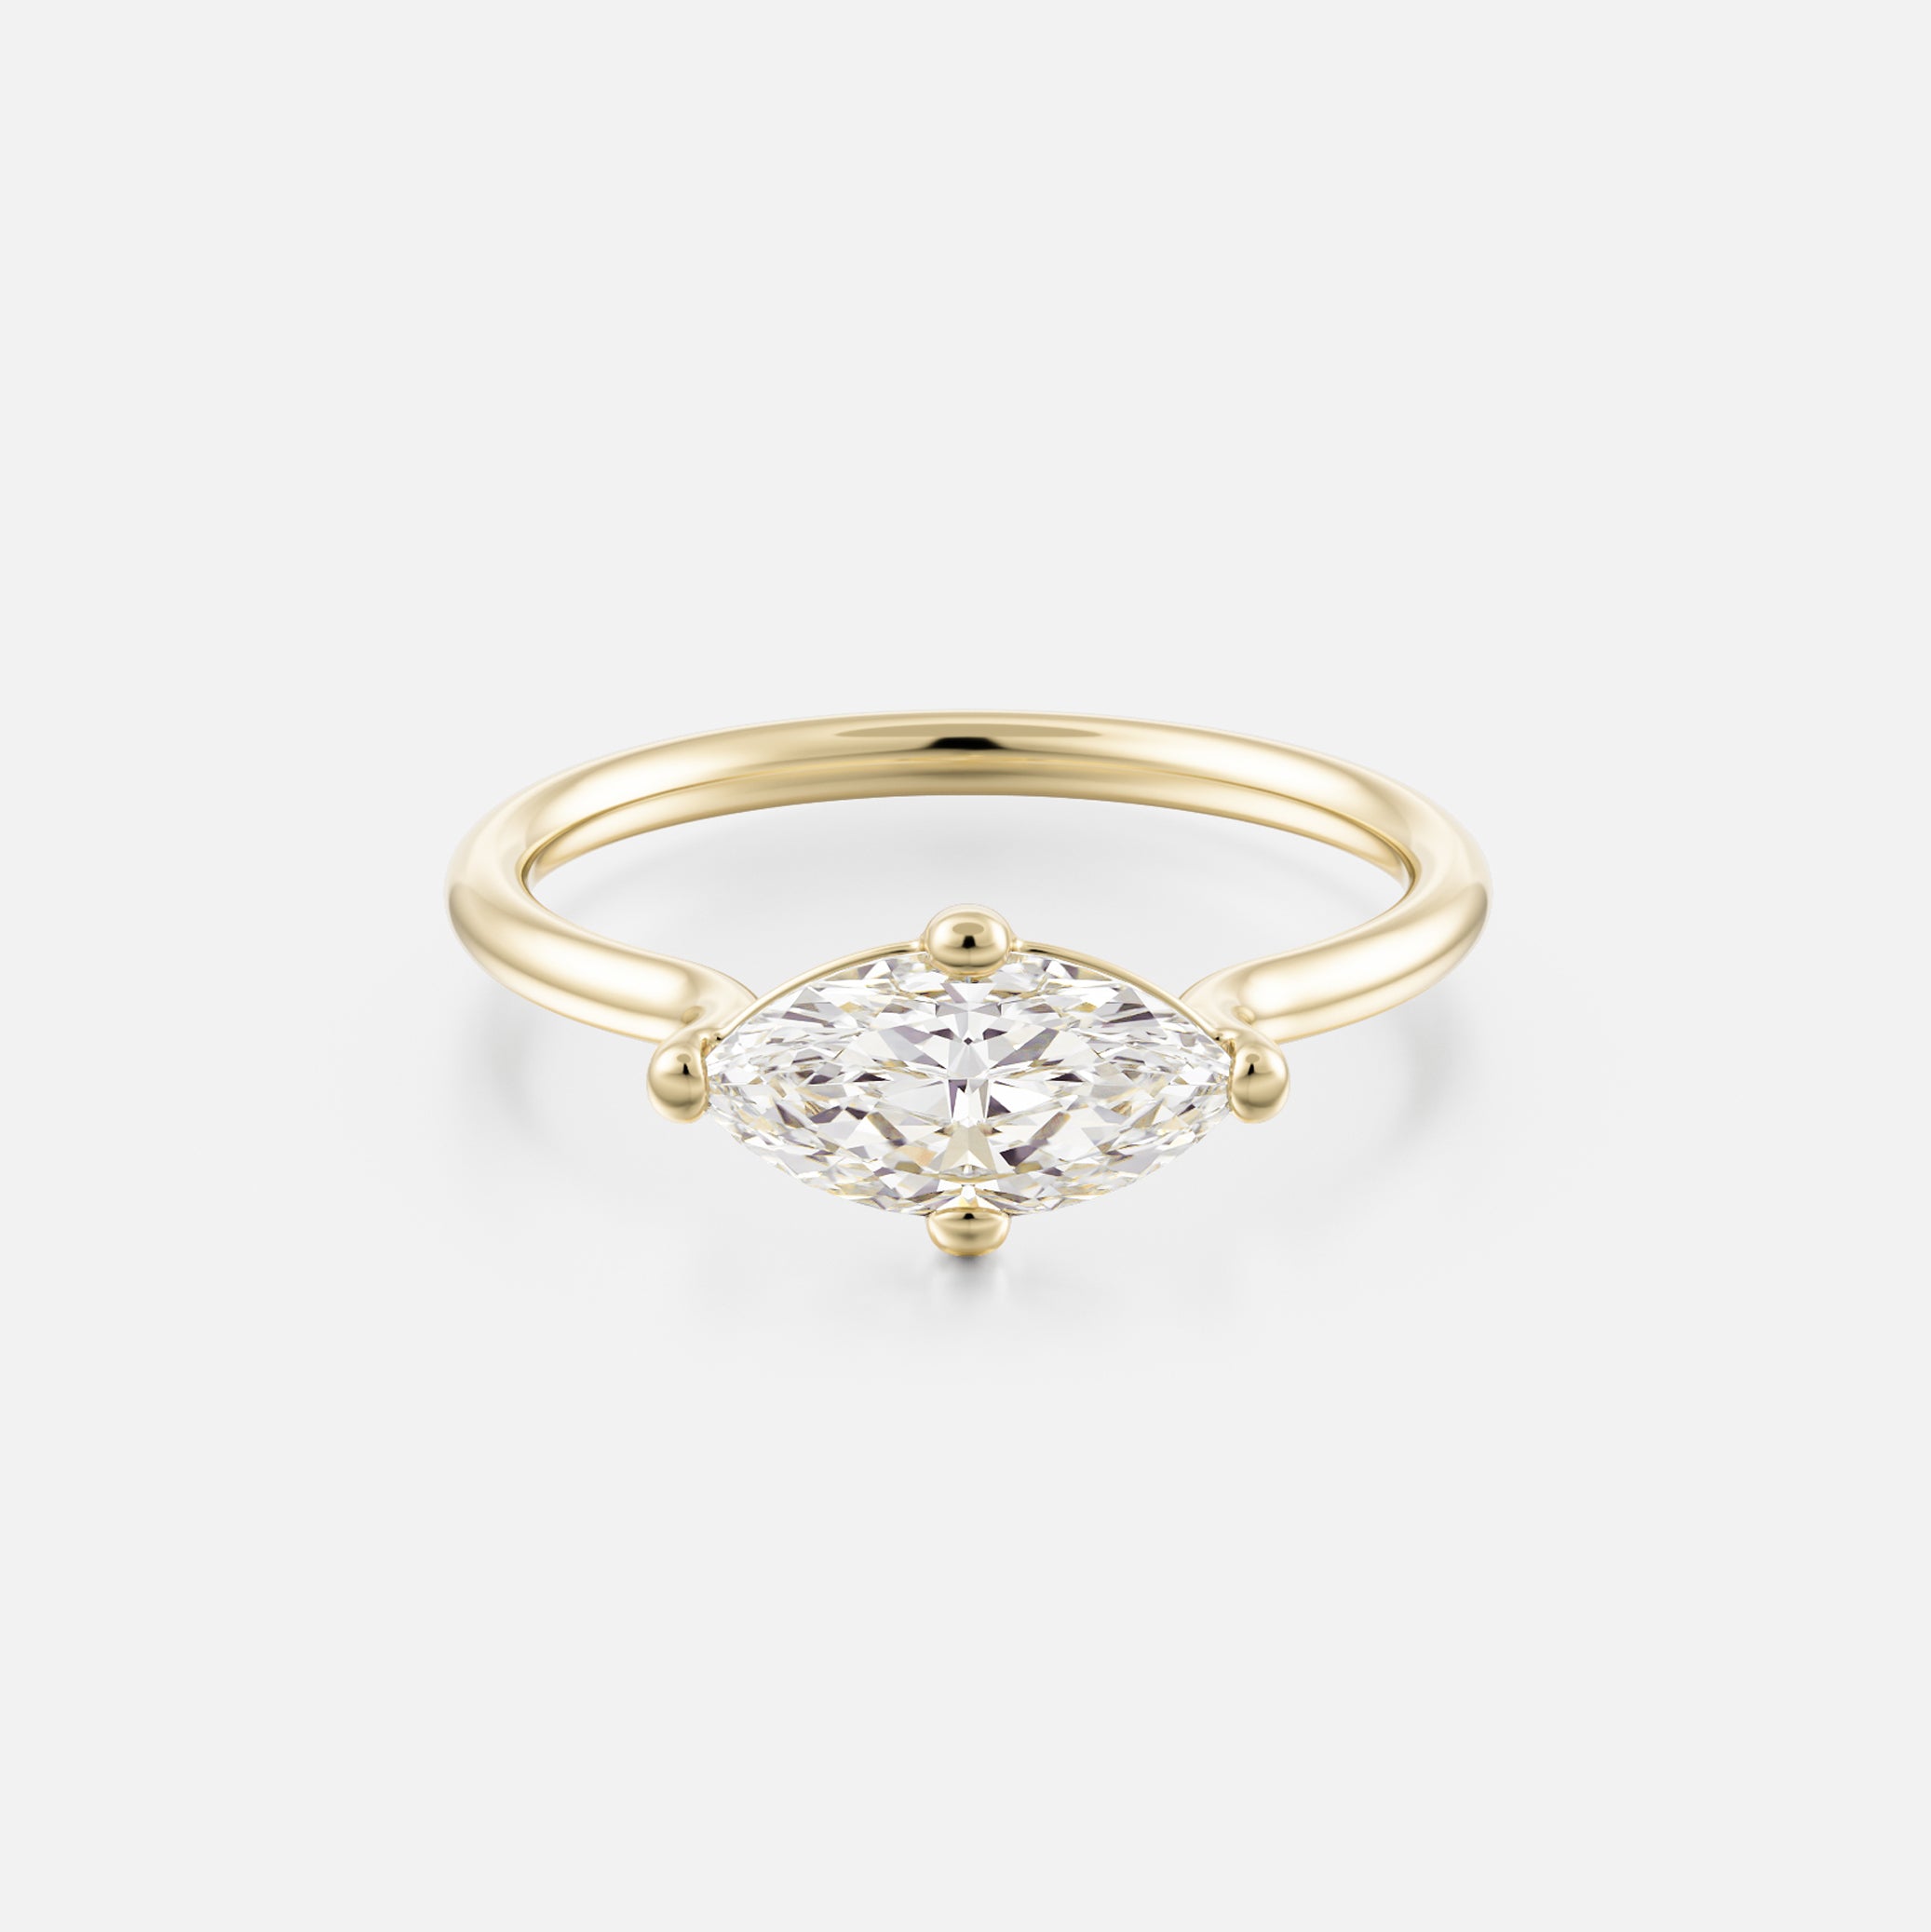 Veli Round Band with East Qest Marquise Simple Engagement Ring Setting in recycled 14k Gold or platinum by SHW Fine Jewelry NYC